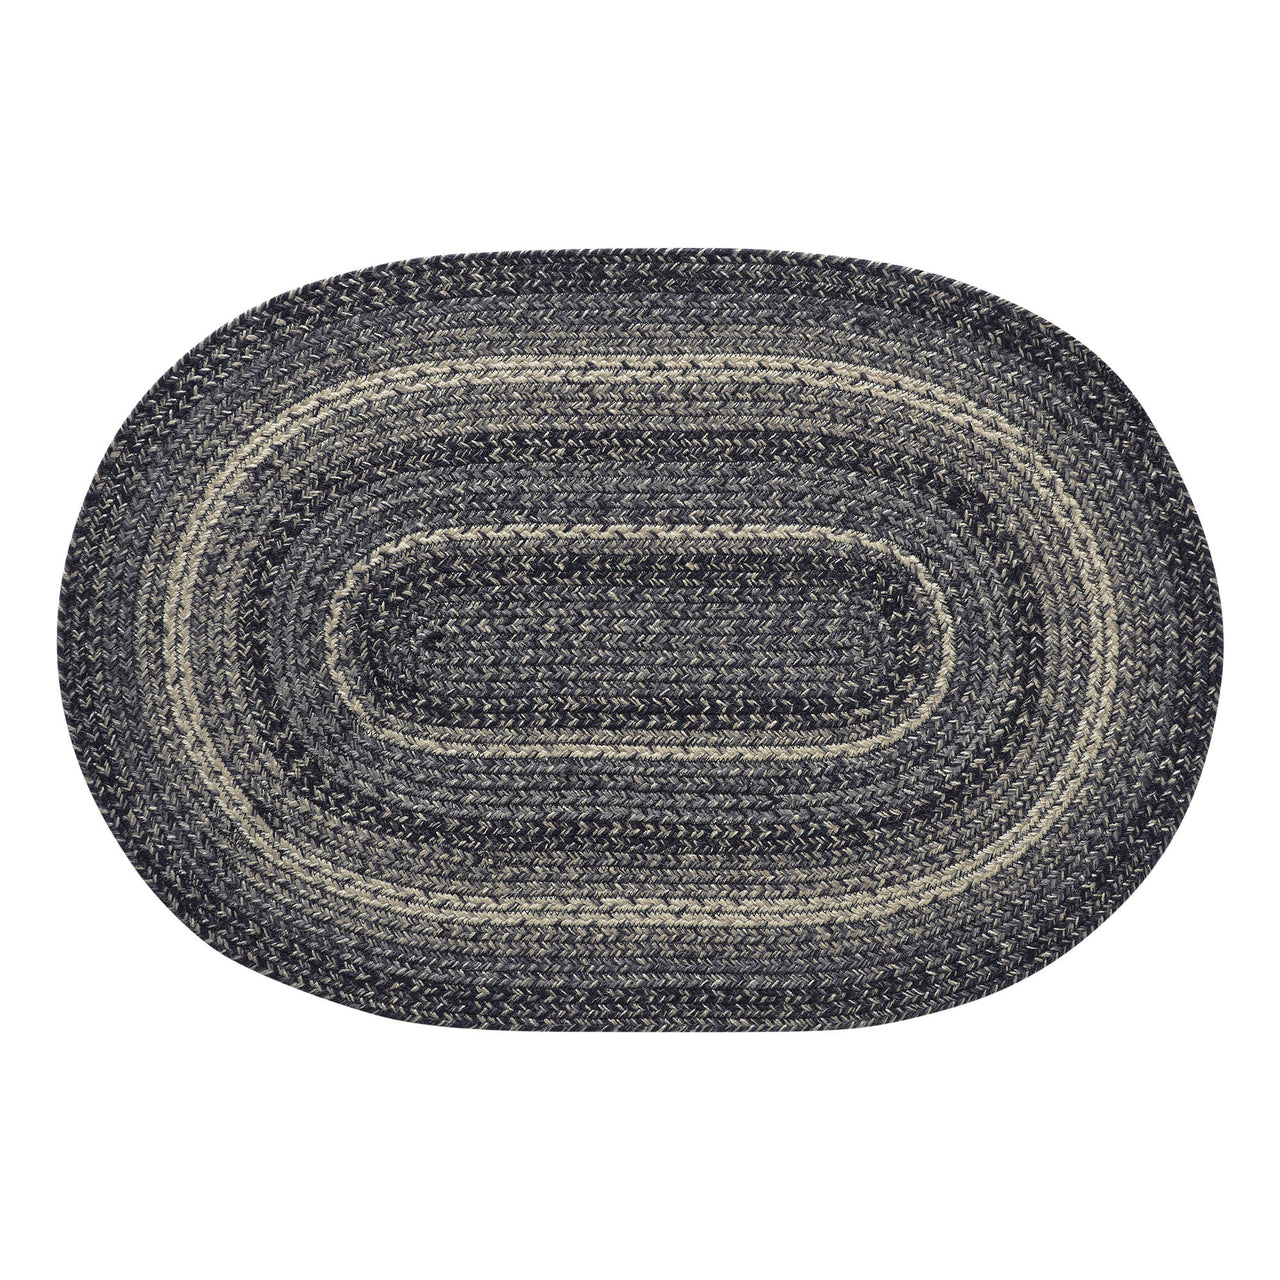 Sawyer Mill Black White Jute Braided Oval Rug with Rug Pad 2x3' VHC Brands